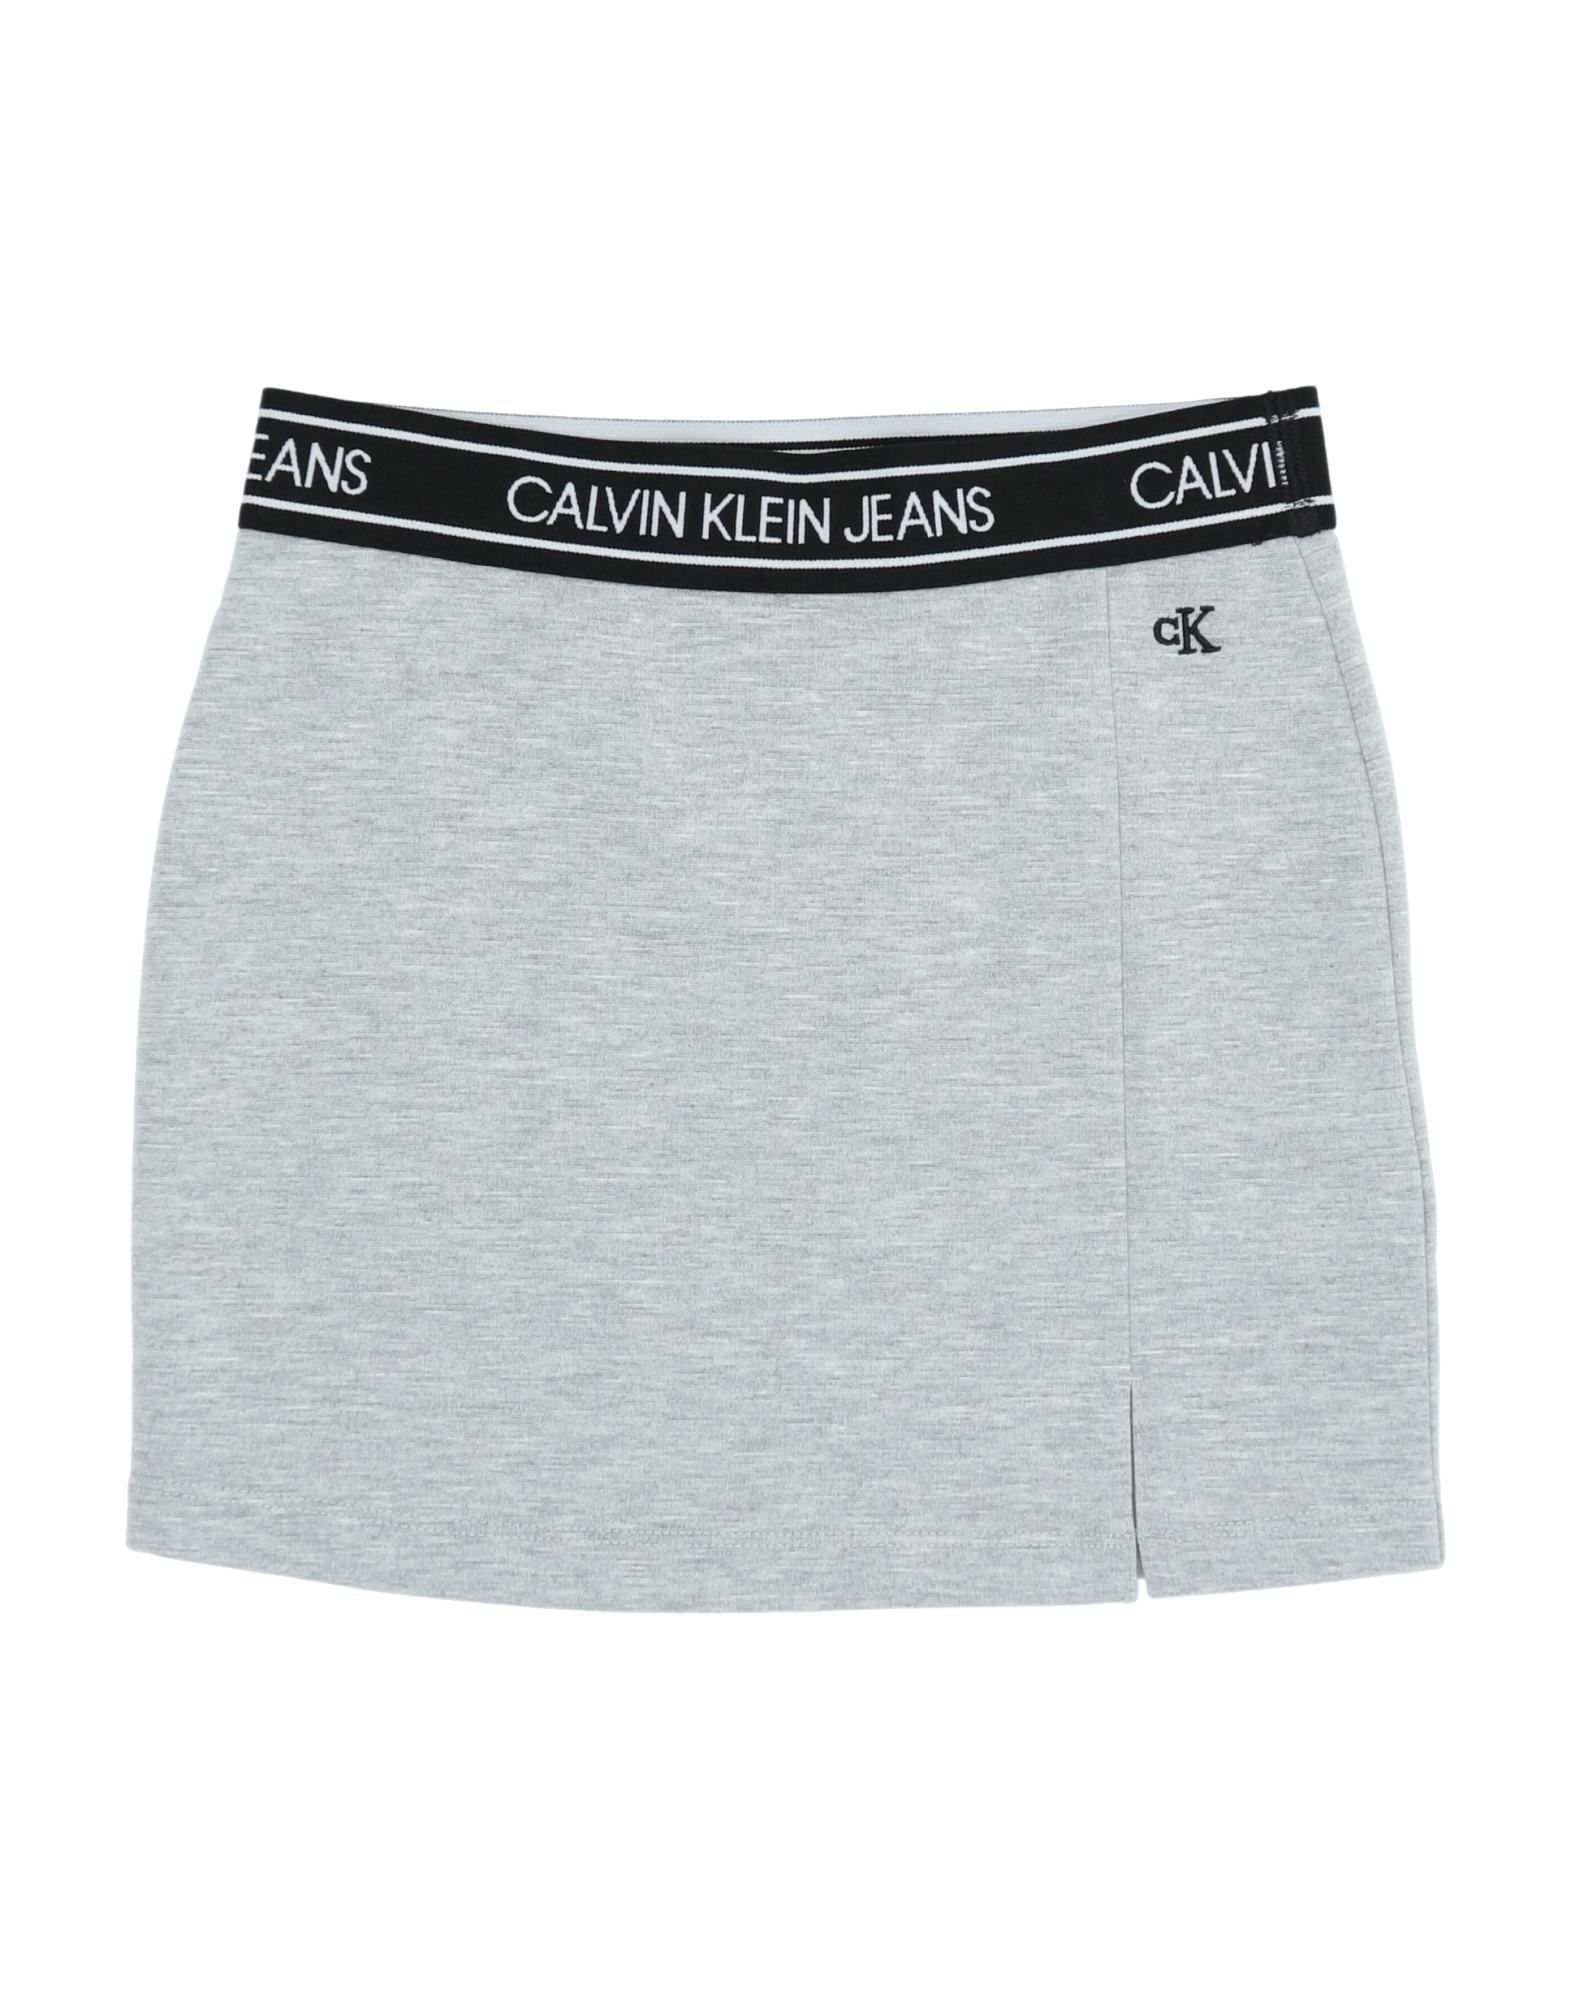 ＜YOOX＞ 20%OFF！CALVIN KLEIN JEANS ガールズ 3-8 歳 キッズスカート グレー 6 レーヨン 66% / ナイロン 29% / ポリウレタン 5%画像